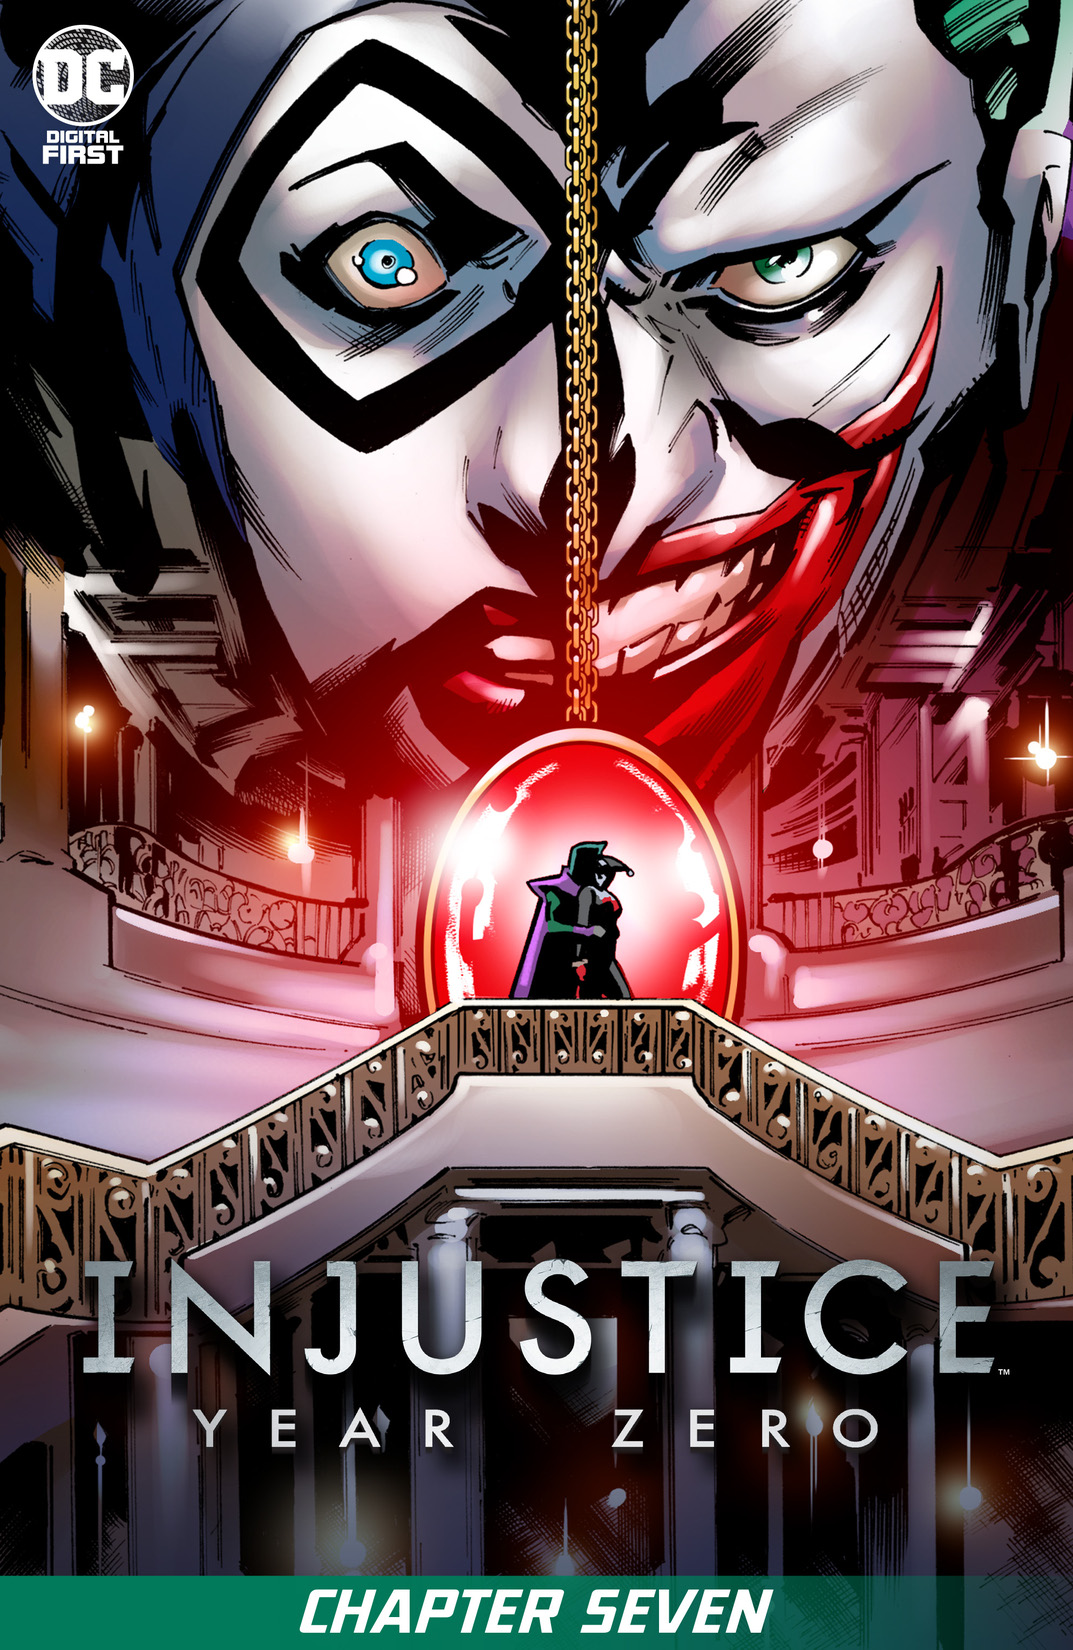 Injustice: Year Zero #7 preview images